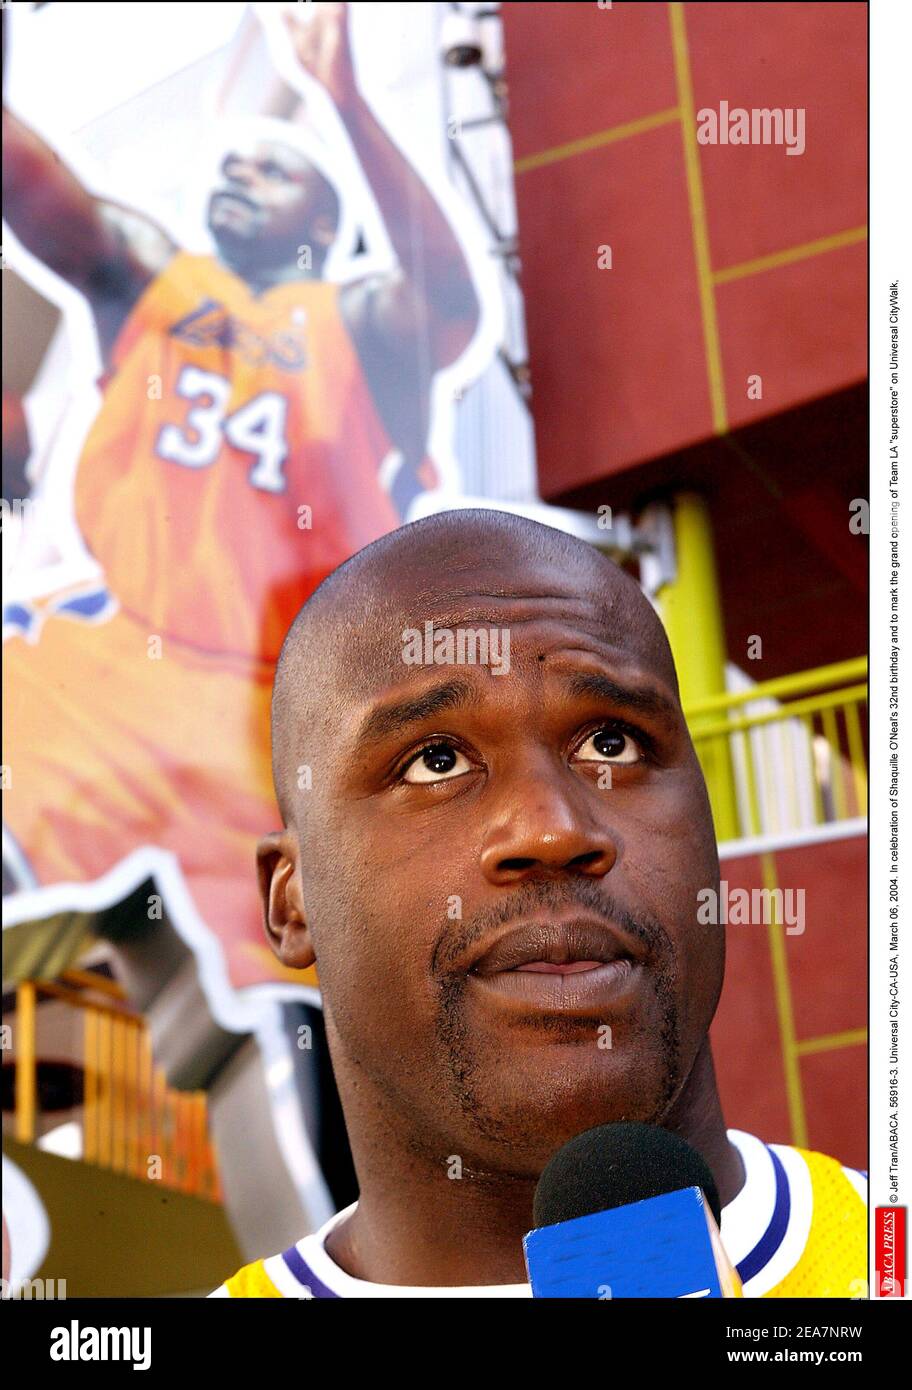 © Jeff Tran/ABACA. 56916-3. Universal City-CA-USA, March 06, 2004. In celebration of Shaquille O'Neal's 32nd birthday and to mark the grand opening of Team LA superstore on Universal CityWalk, Shaquille unveils a 40 feet tall neon sign in his likeness sporting his famous number 34 Lakers Jersey. However, Shaquille attends the event wearing a Lakers Jersey number 33 which was once worn by a retired Lakers player, Kareem Abdul-Jabar. Stock Photo